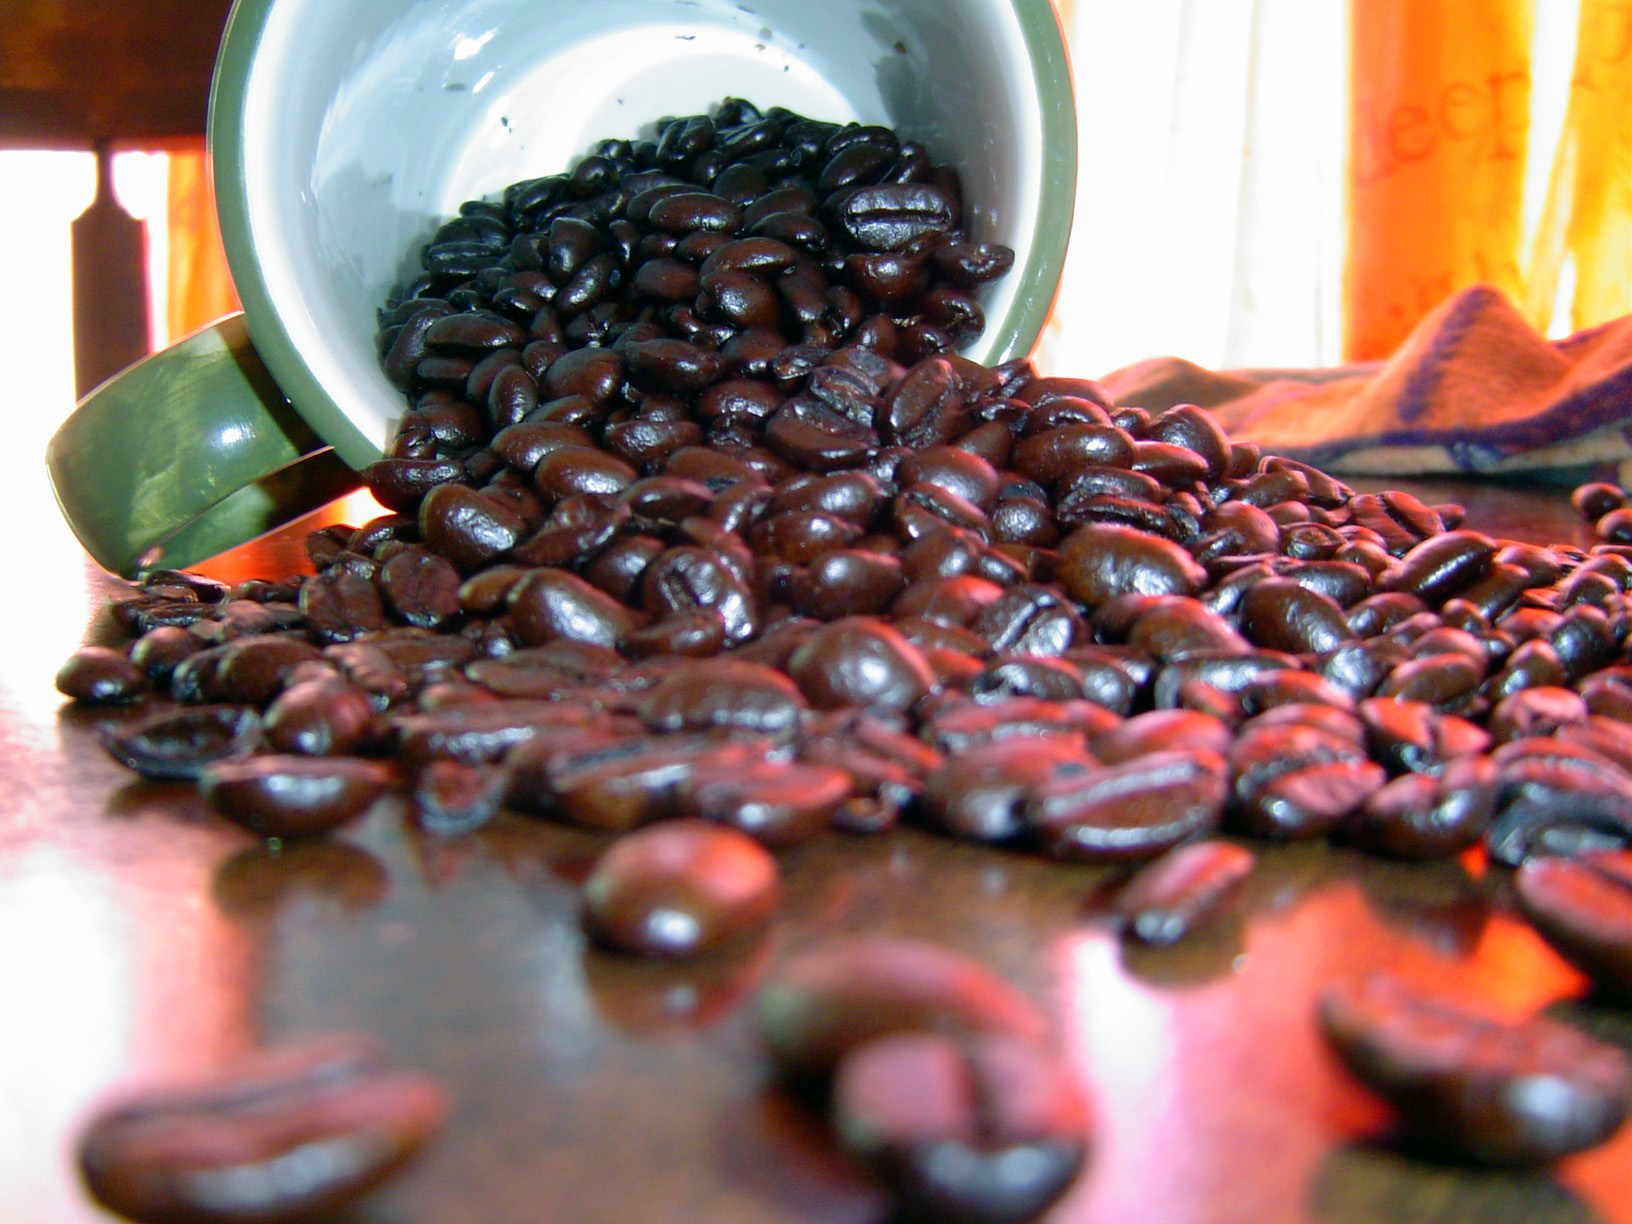 Coffee left. Spilling the Beans. Spill. The Beans pics.